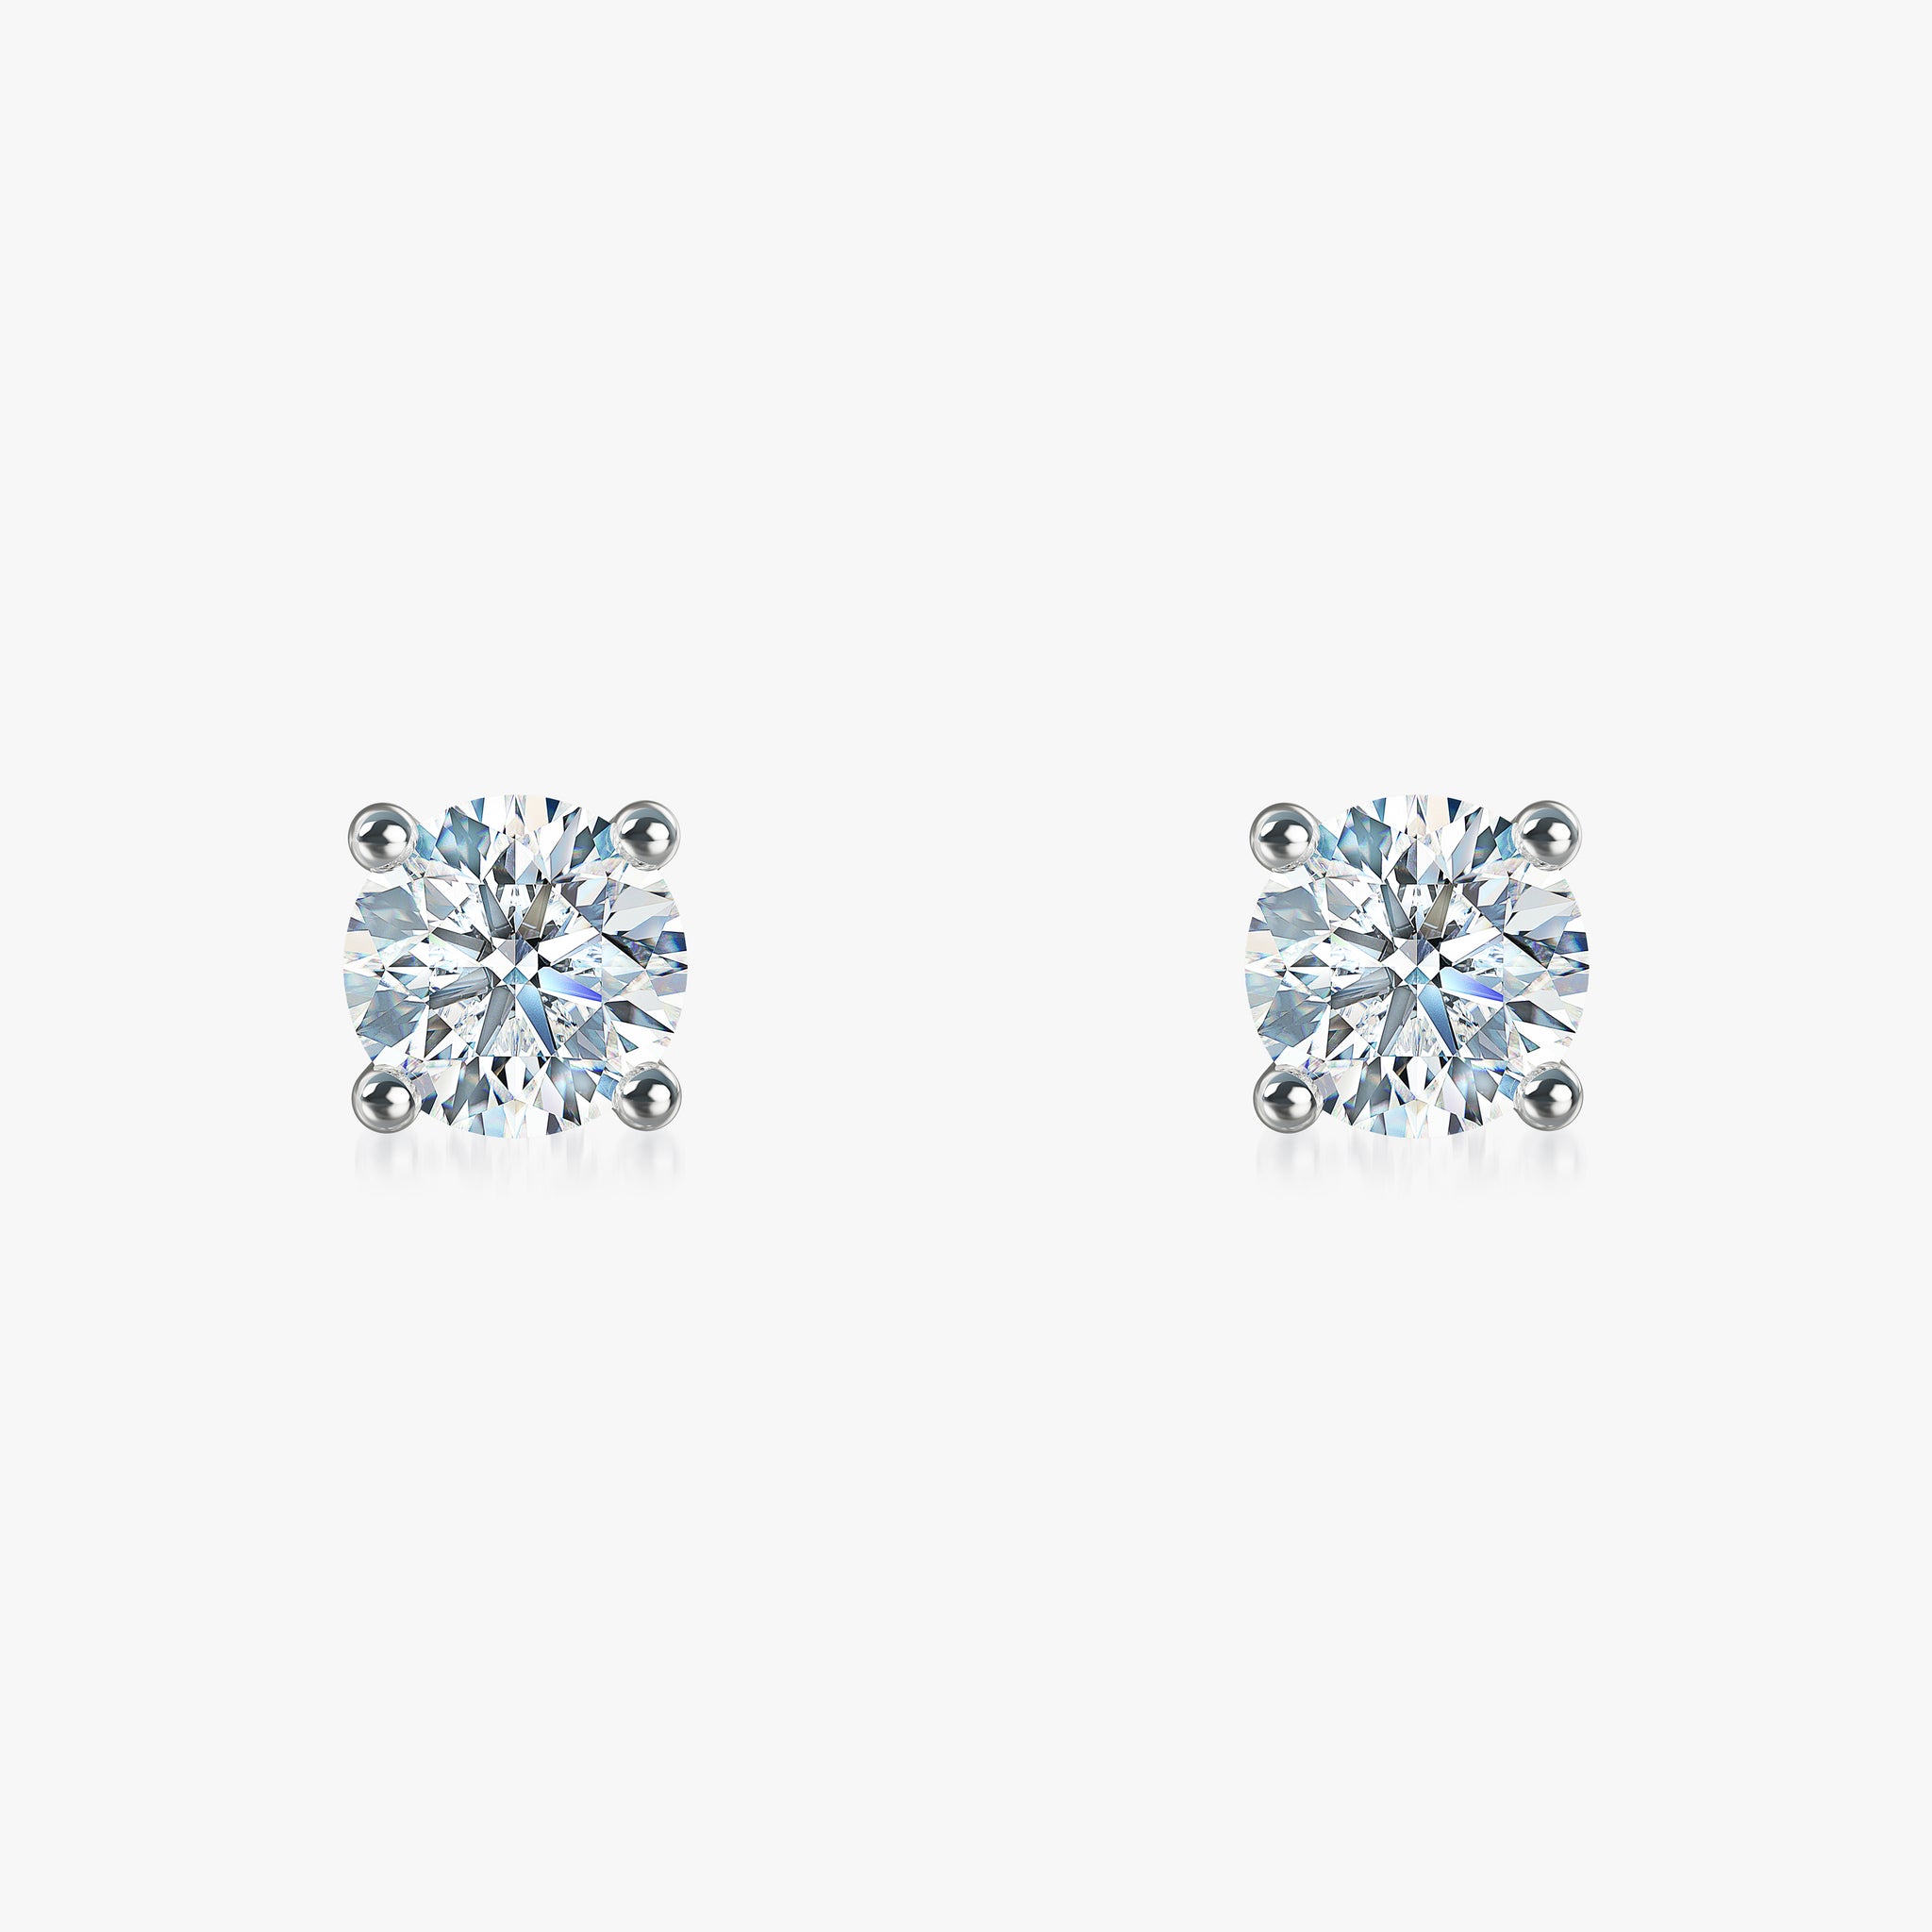 J'EVAR 18KT White Gold ALTR Lab Grown Diamond Stud Earrings with Guardian Backs Front View